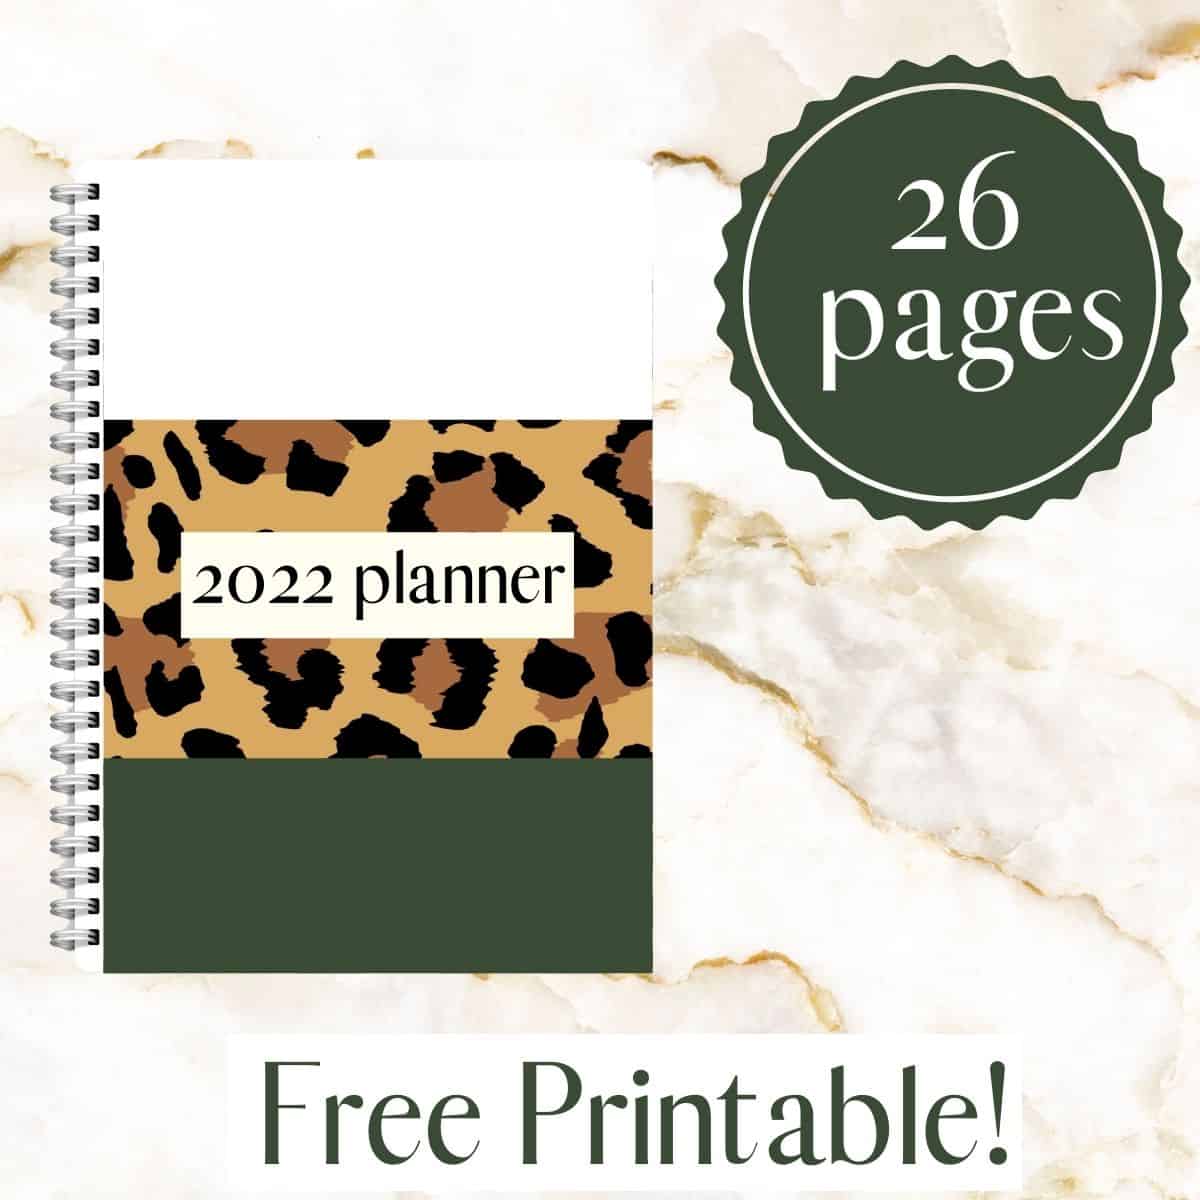 a printable 2022 planner that has twenty six pages